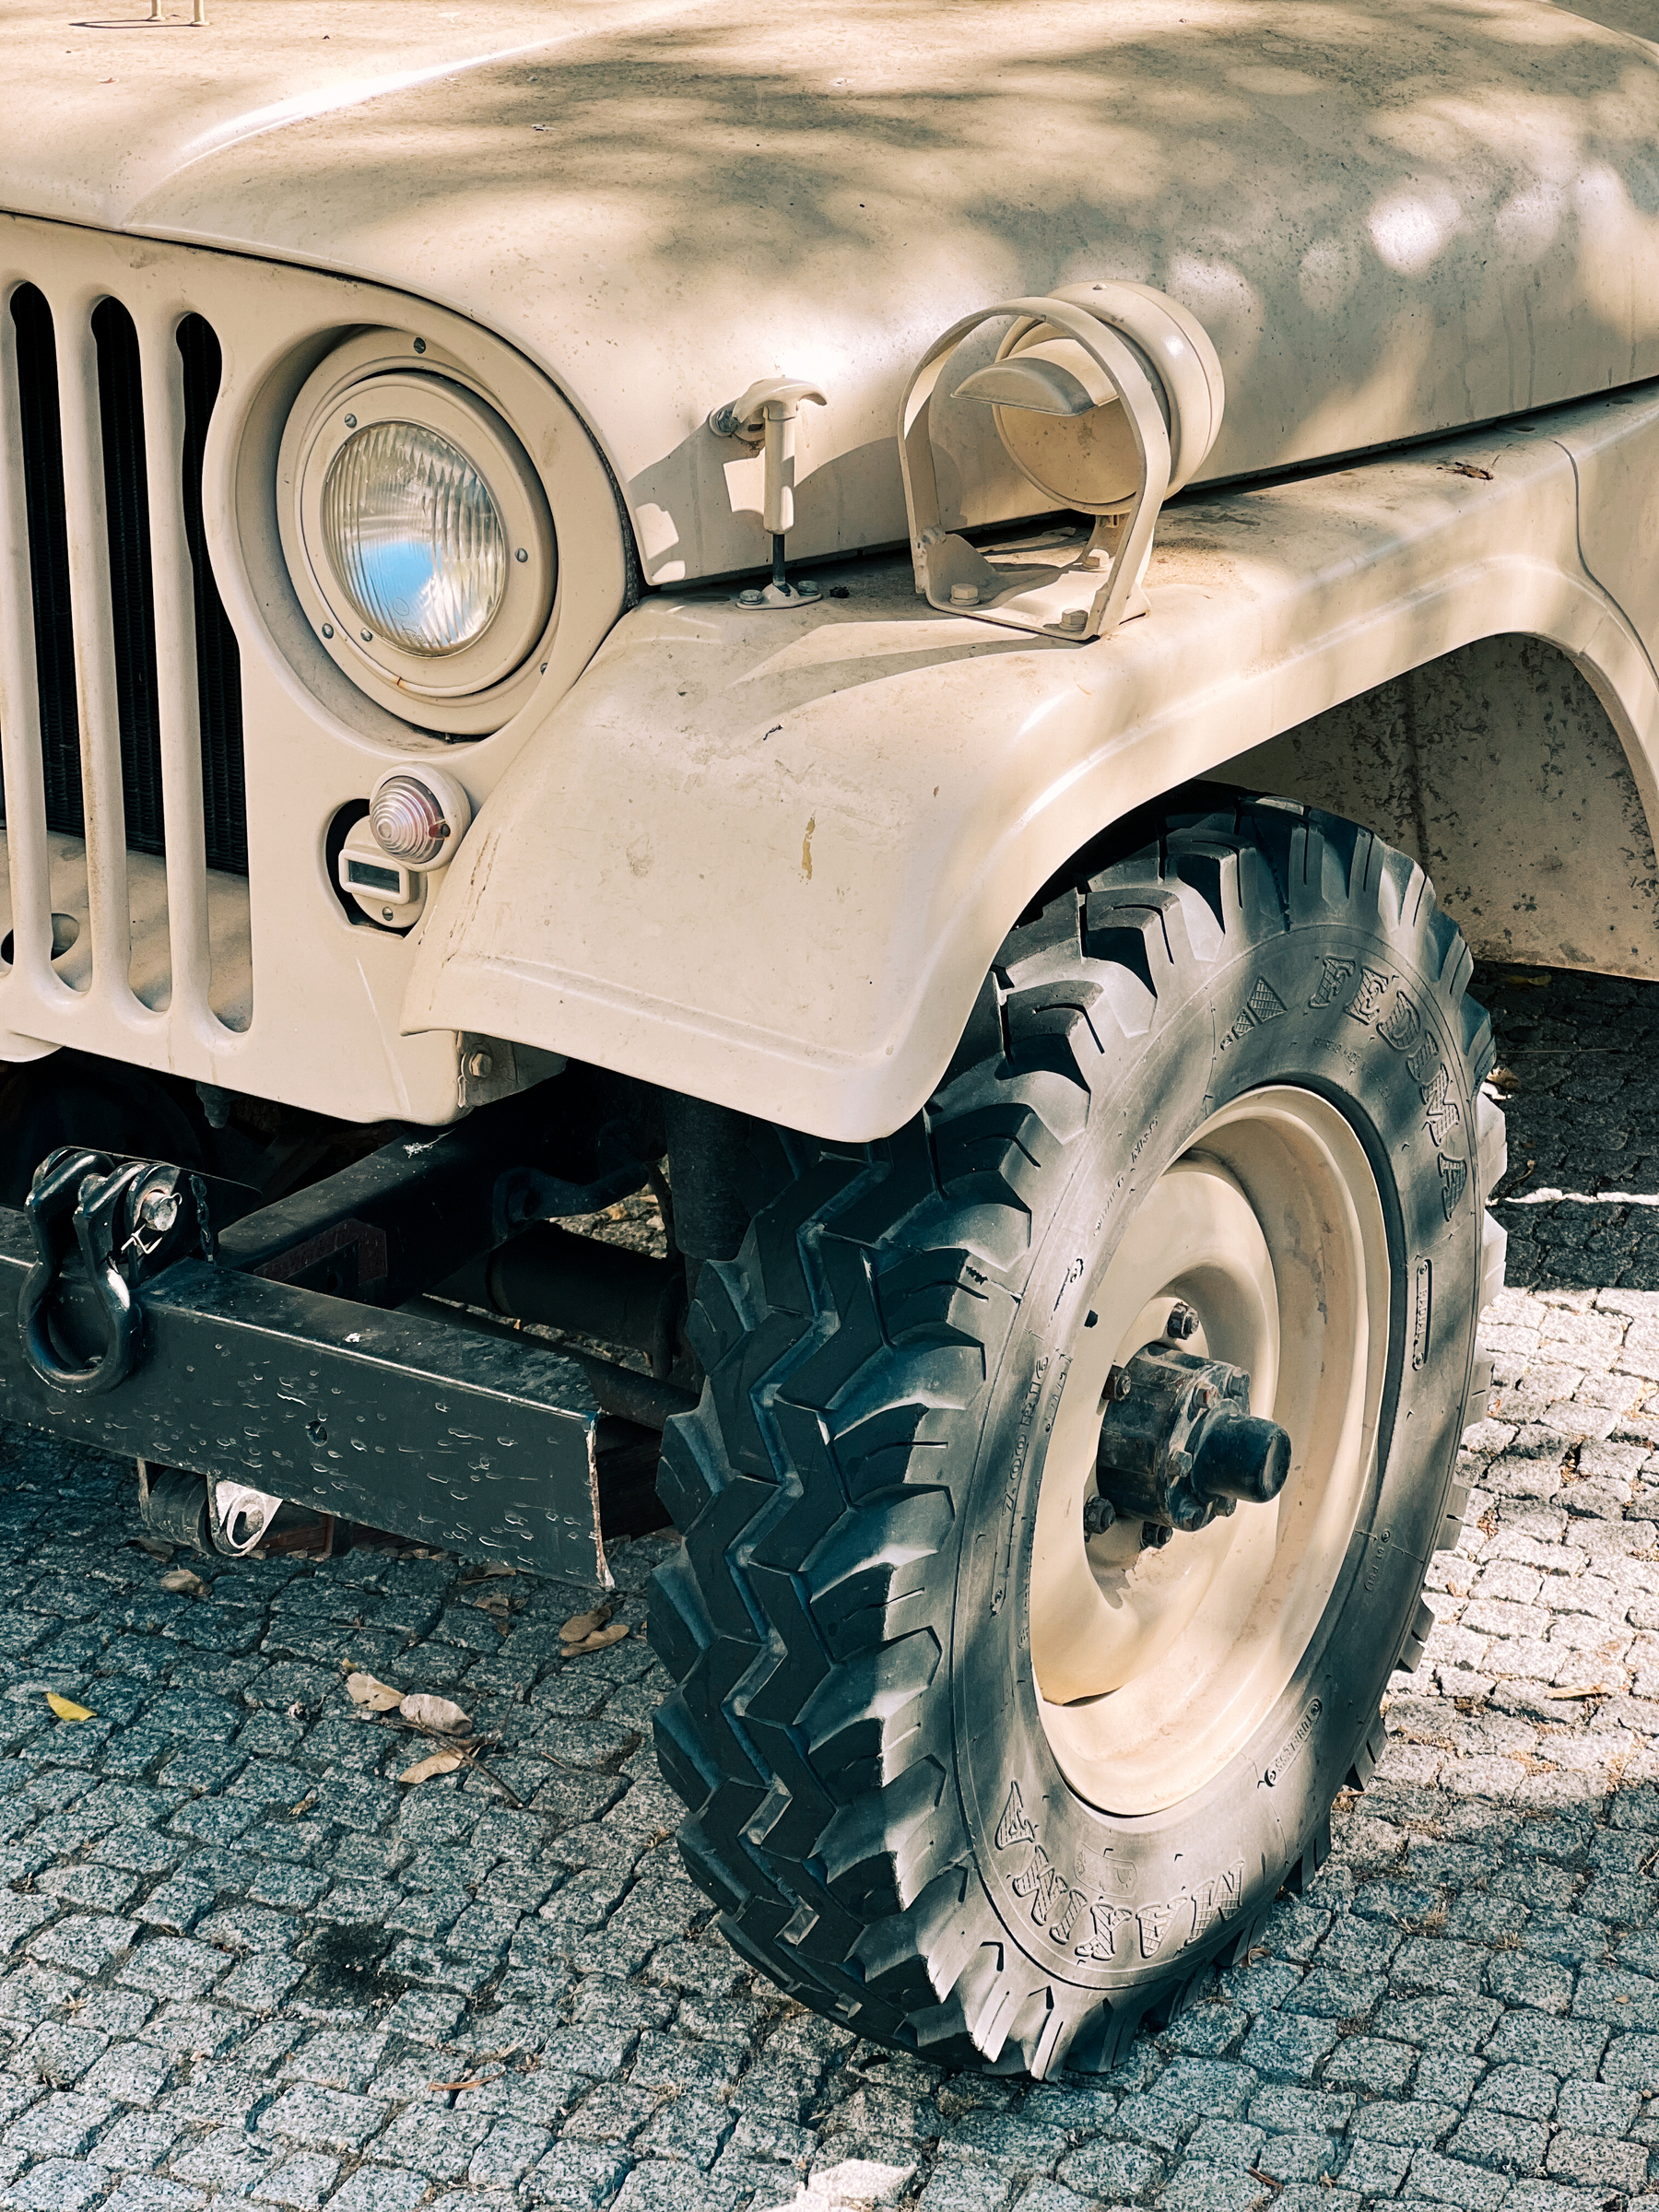 Detail of old jeep.